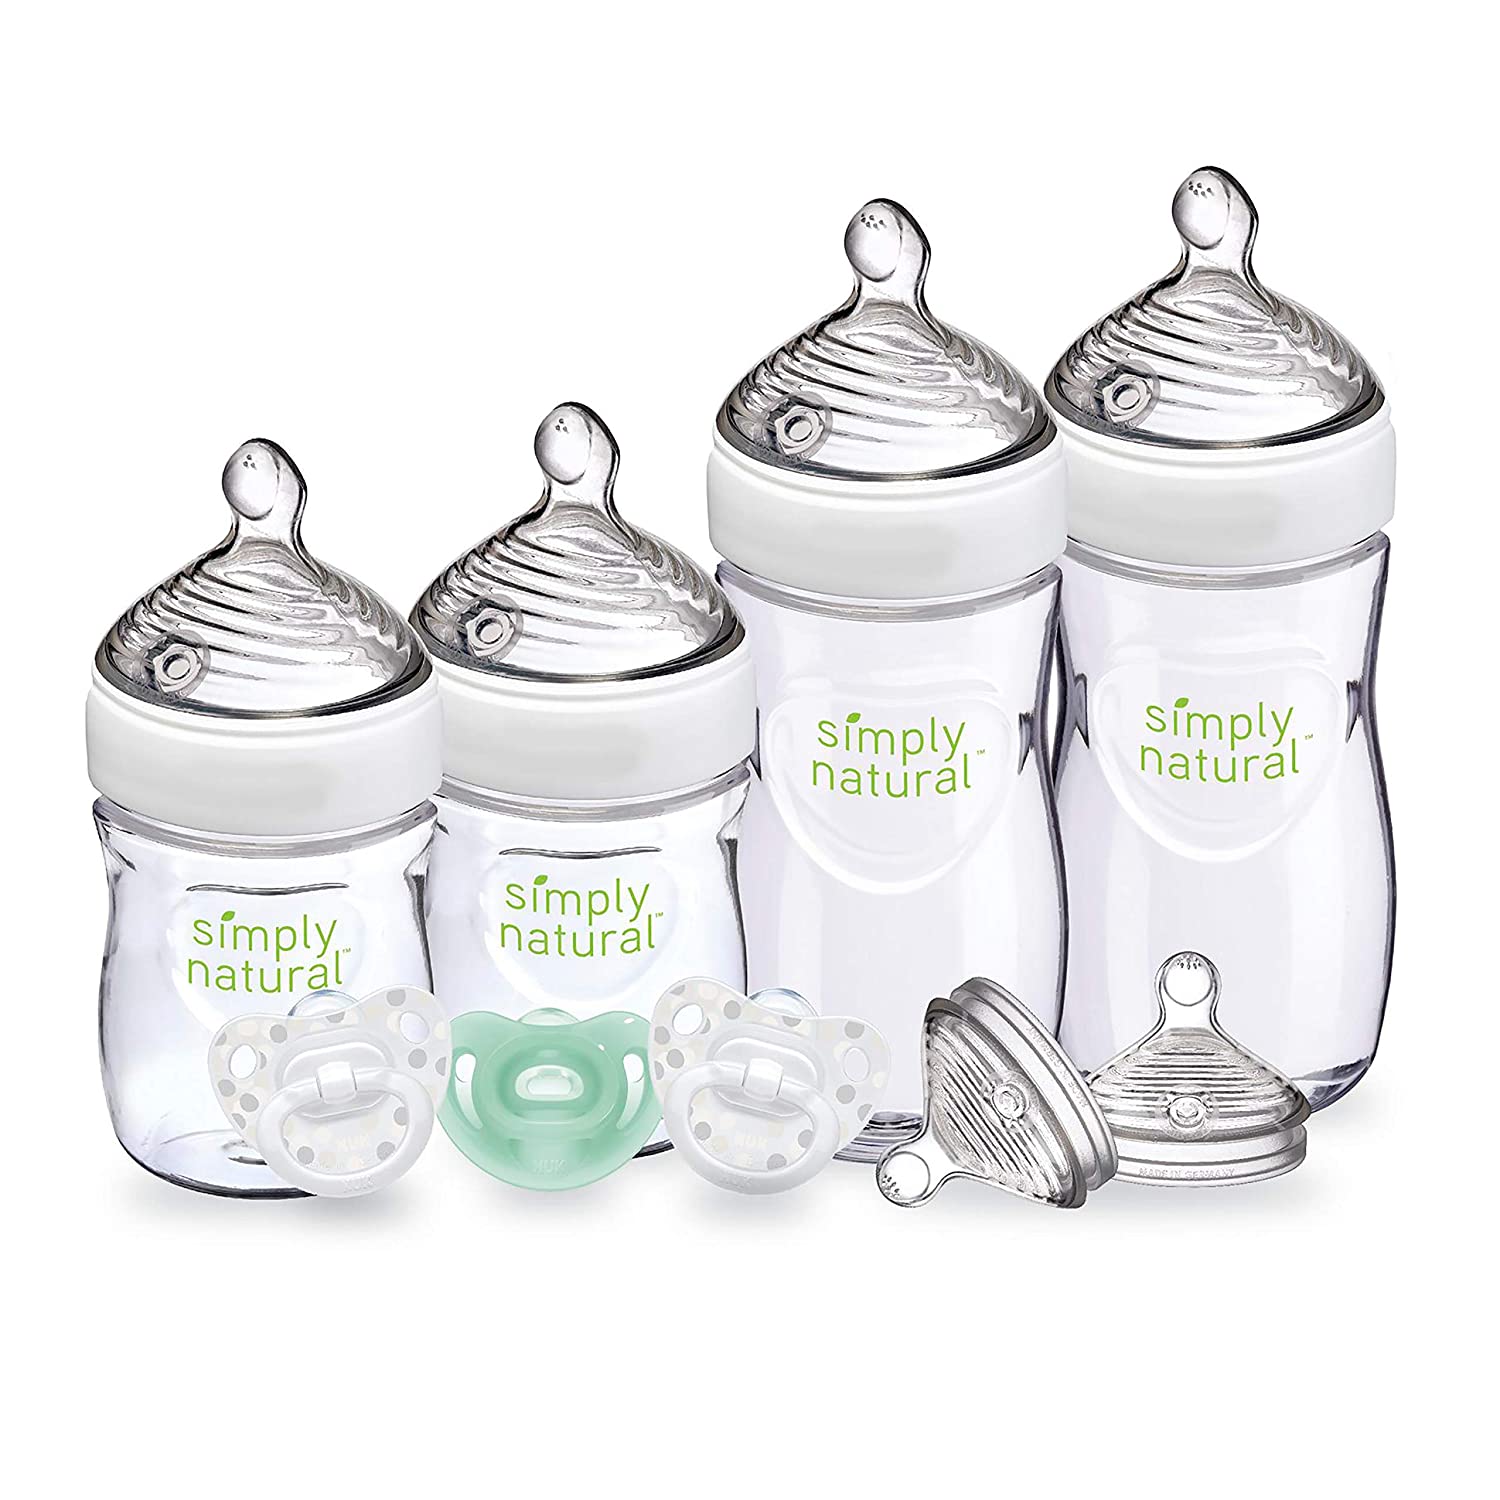 NUK Simply Natural Baby Bottles For Breastfed Babies